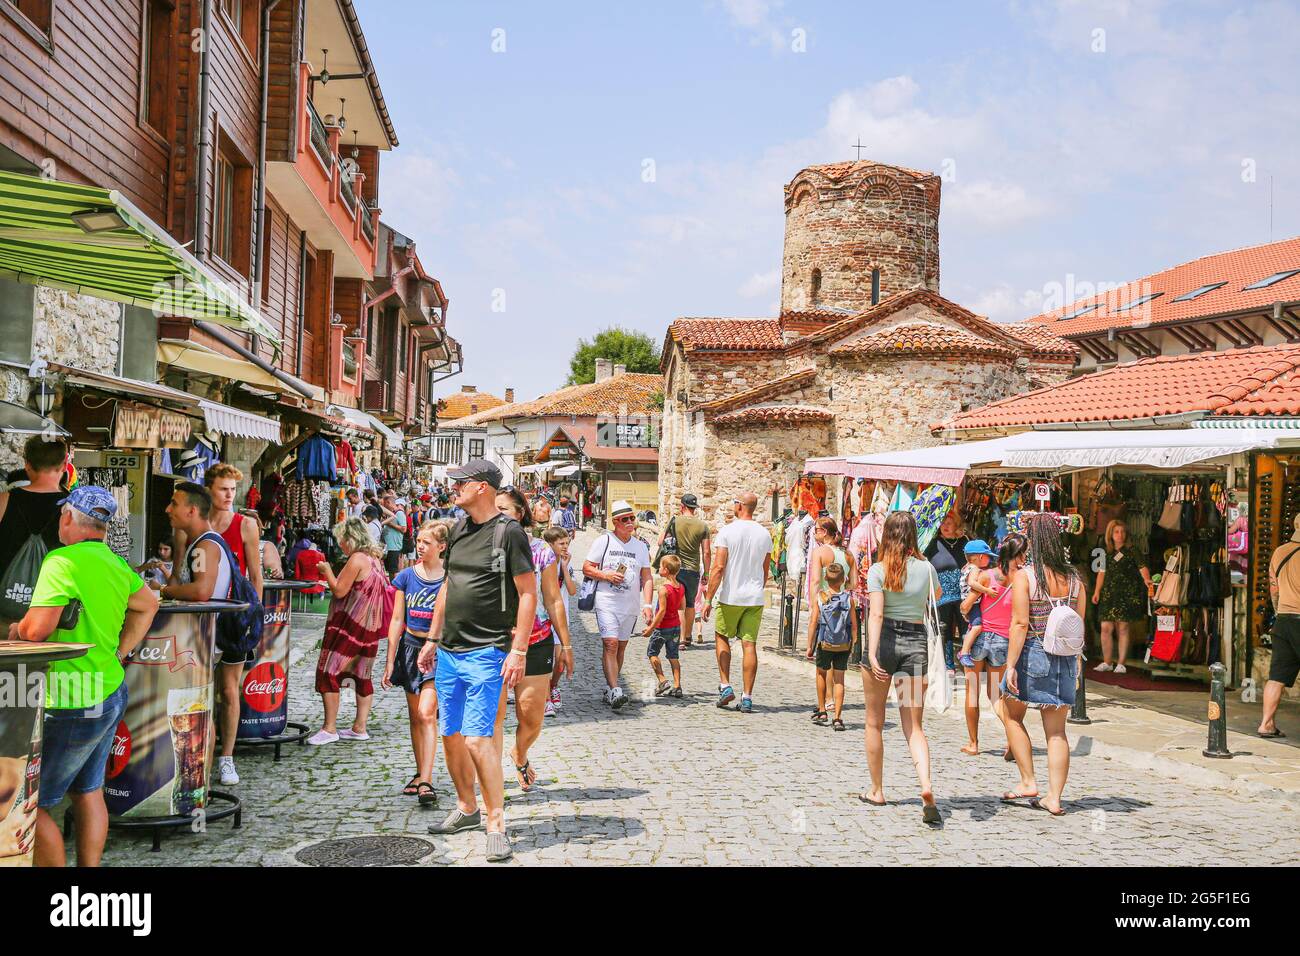 29 of July 2019, Nessebar Bulgaria. Nesebar old town, local market with souvenir, traditional clothers and church. Stock Photo